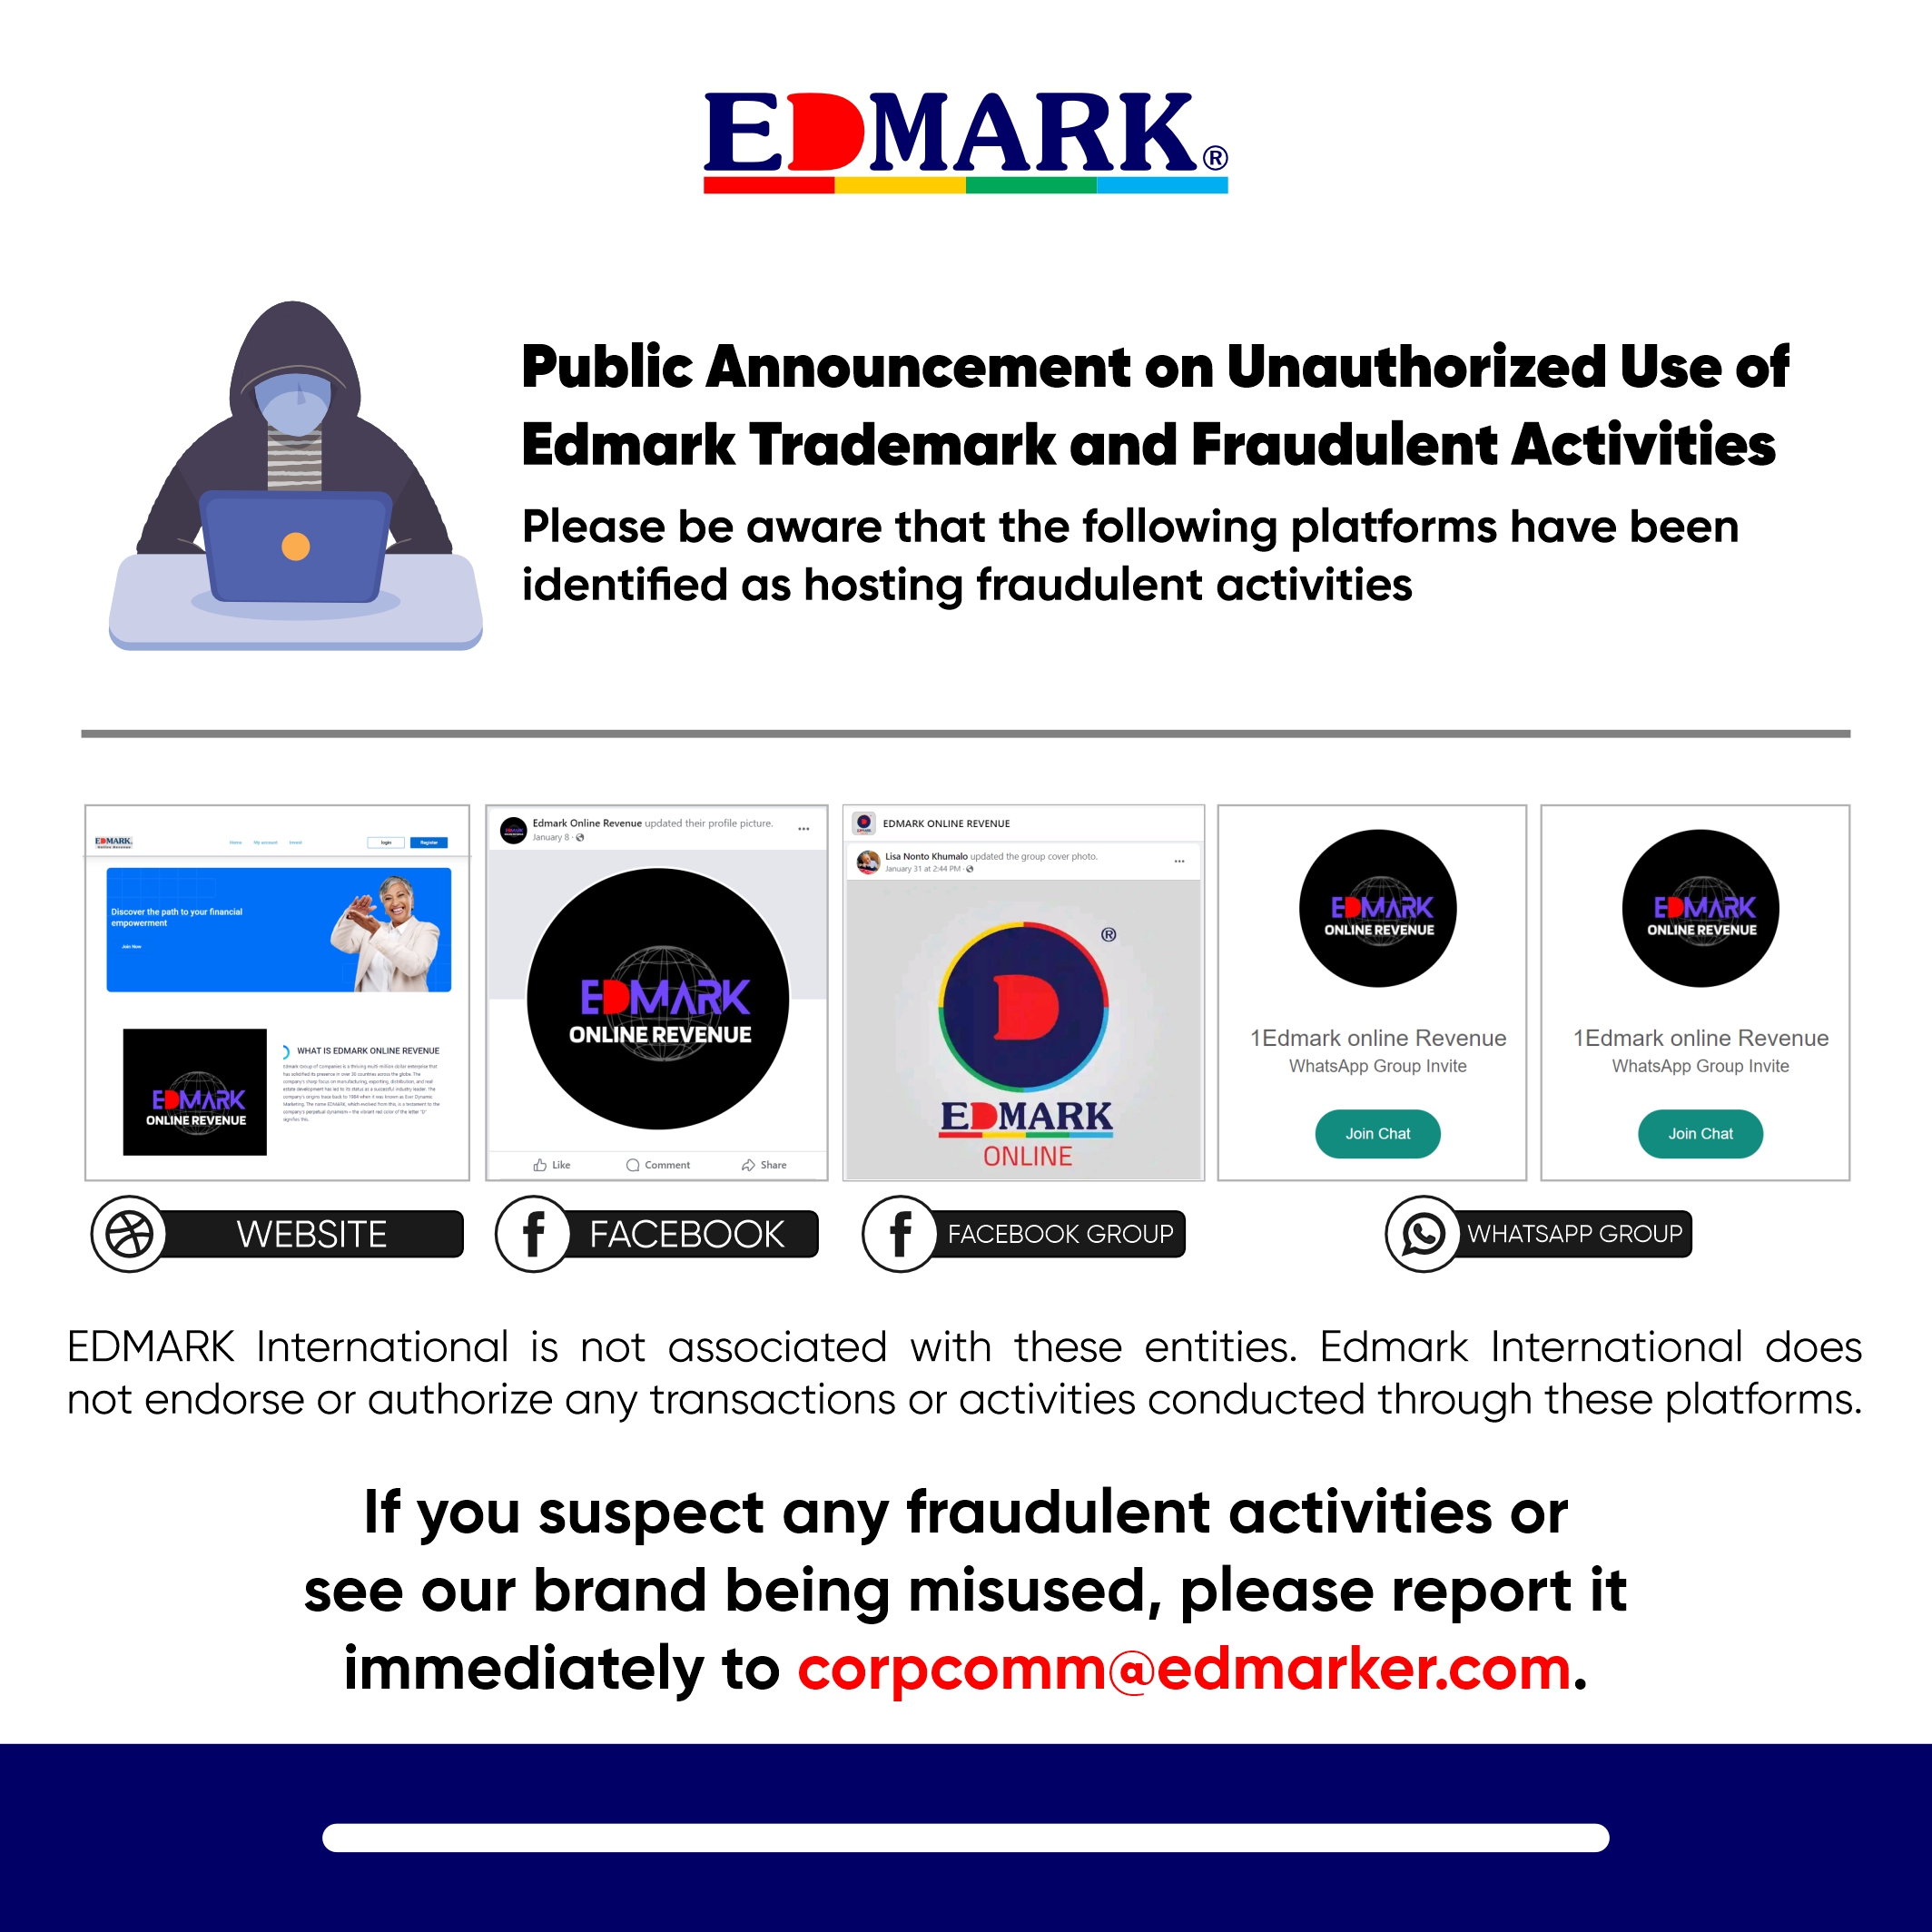 Public Announcement on Unauthorised Use of Edmark Trademark and Fraudulent Activities